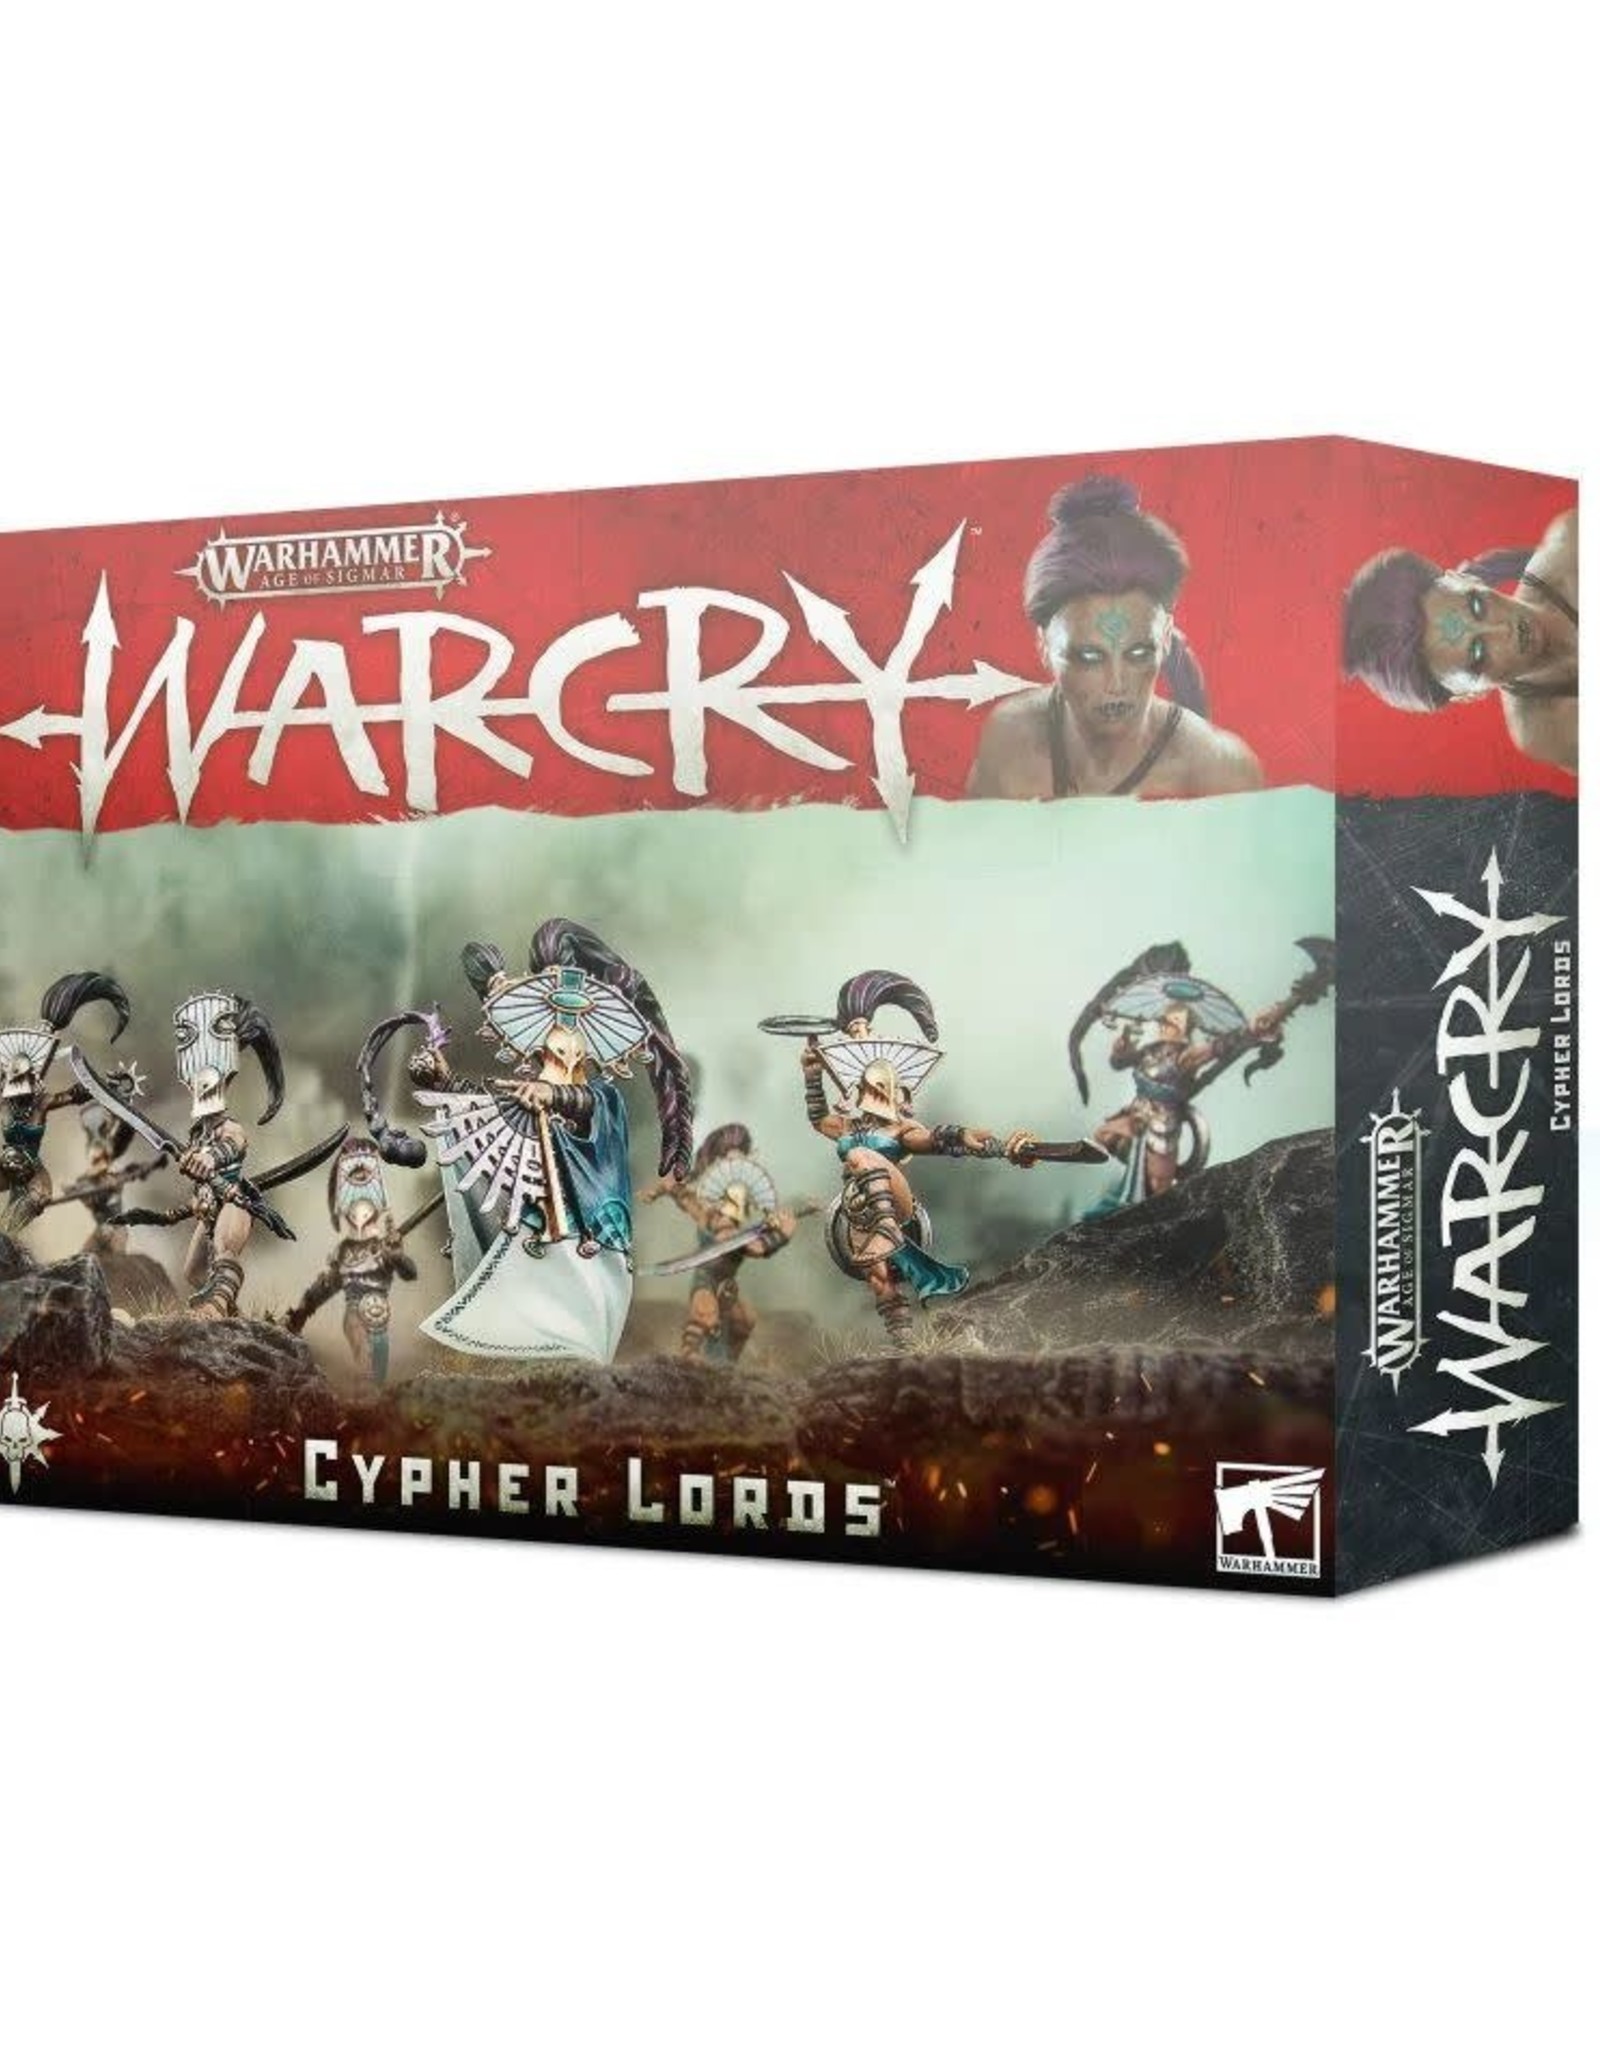 Warcry Warcry - Cypher Lords